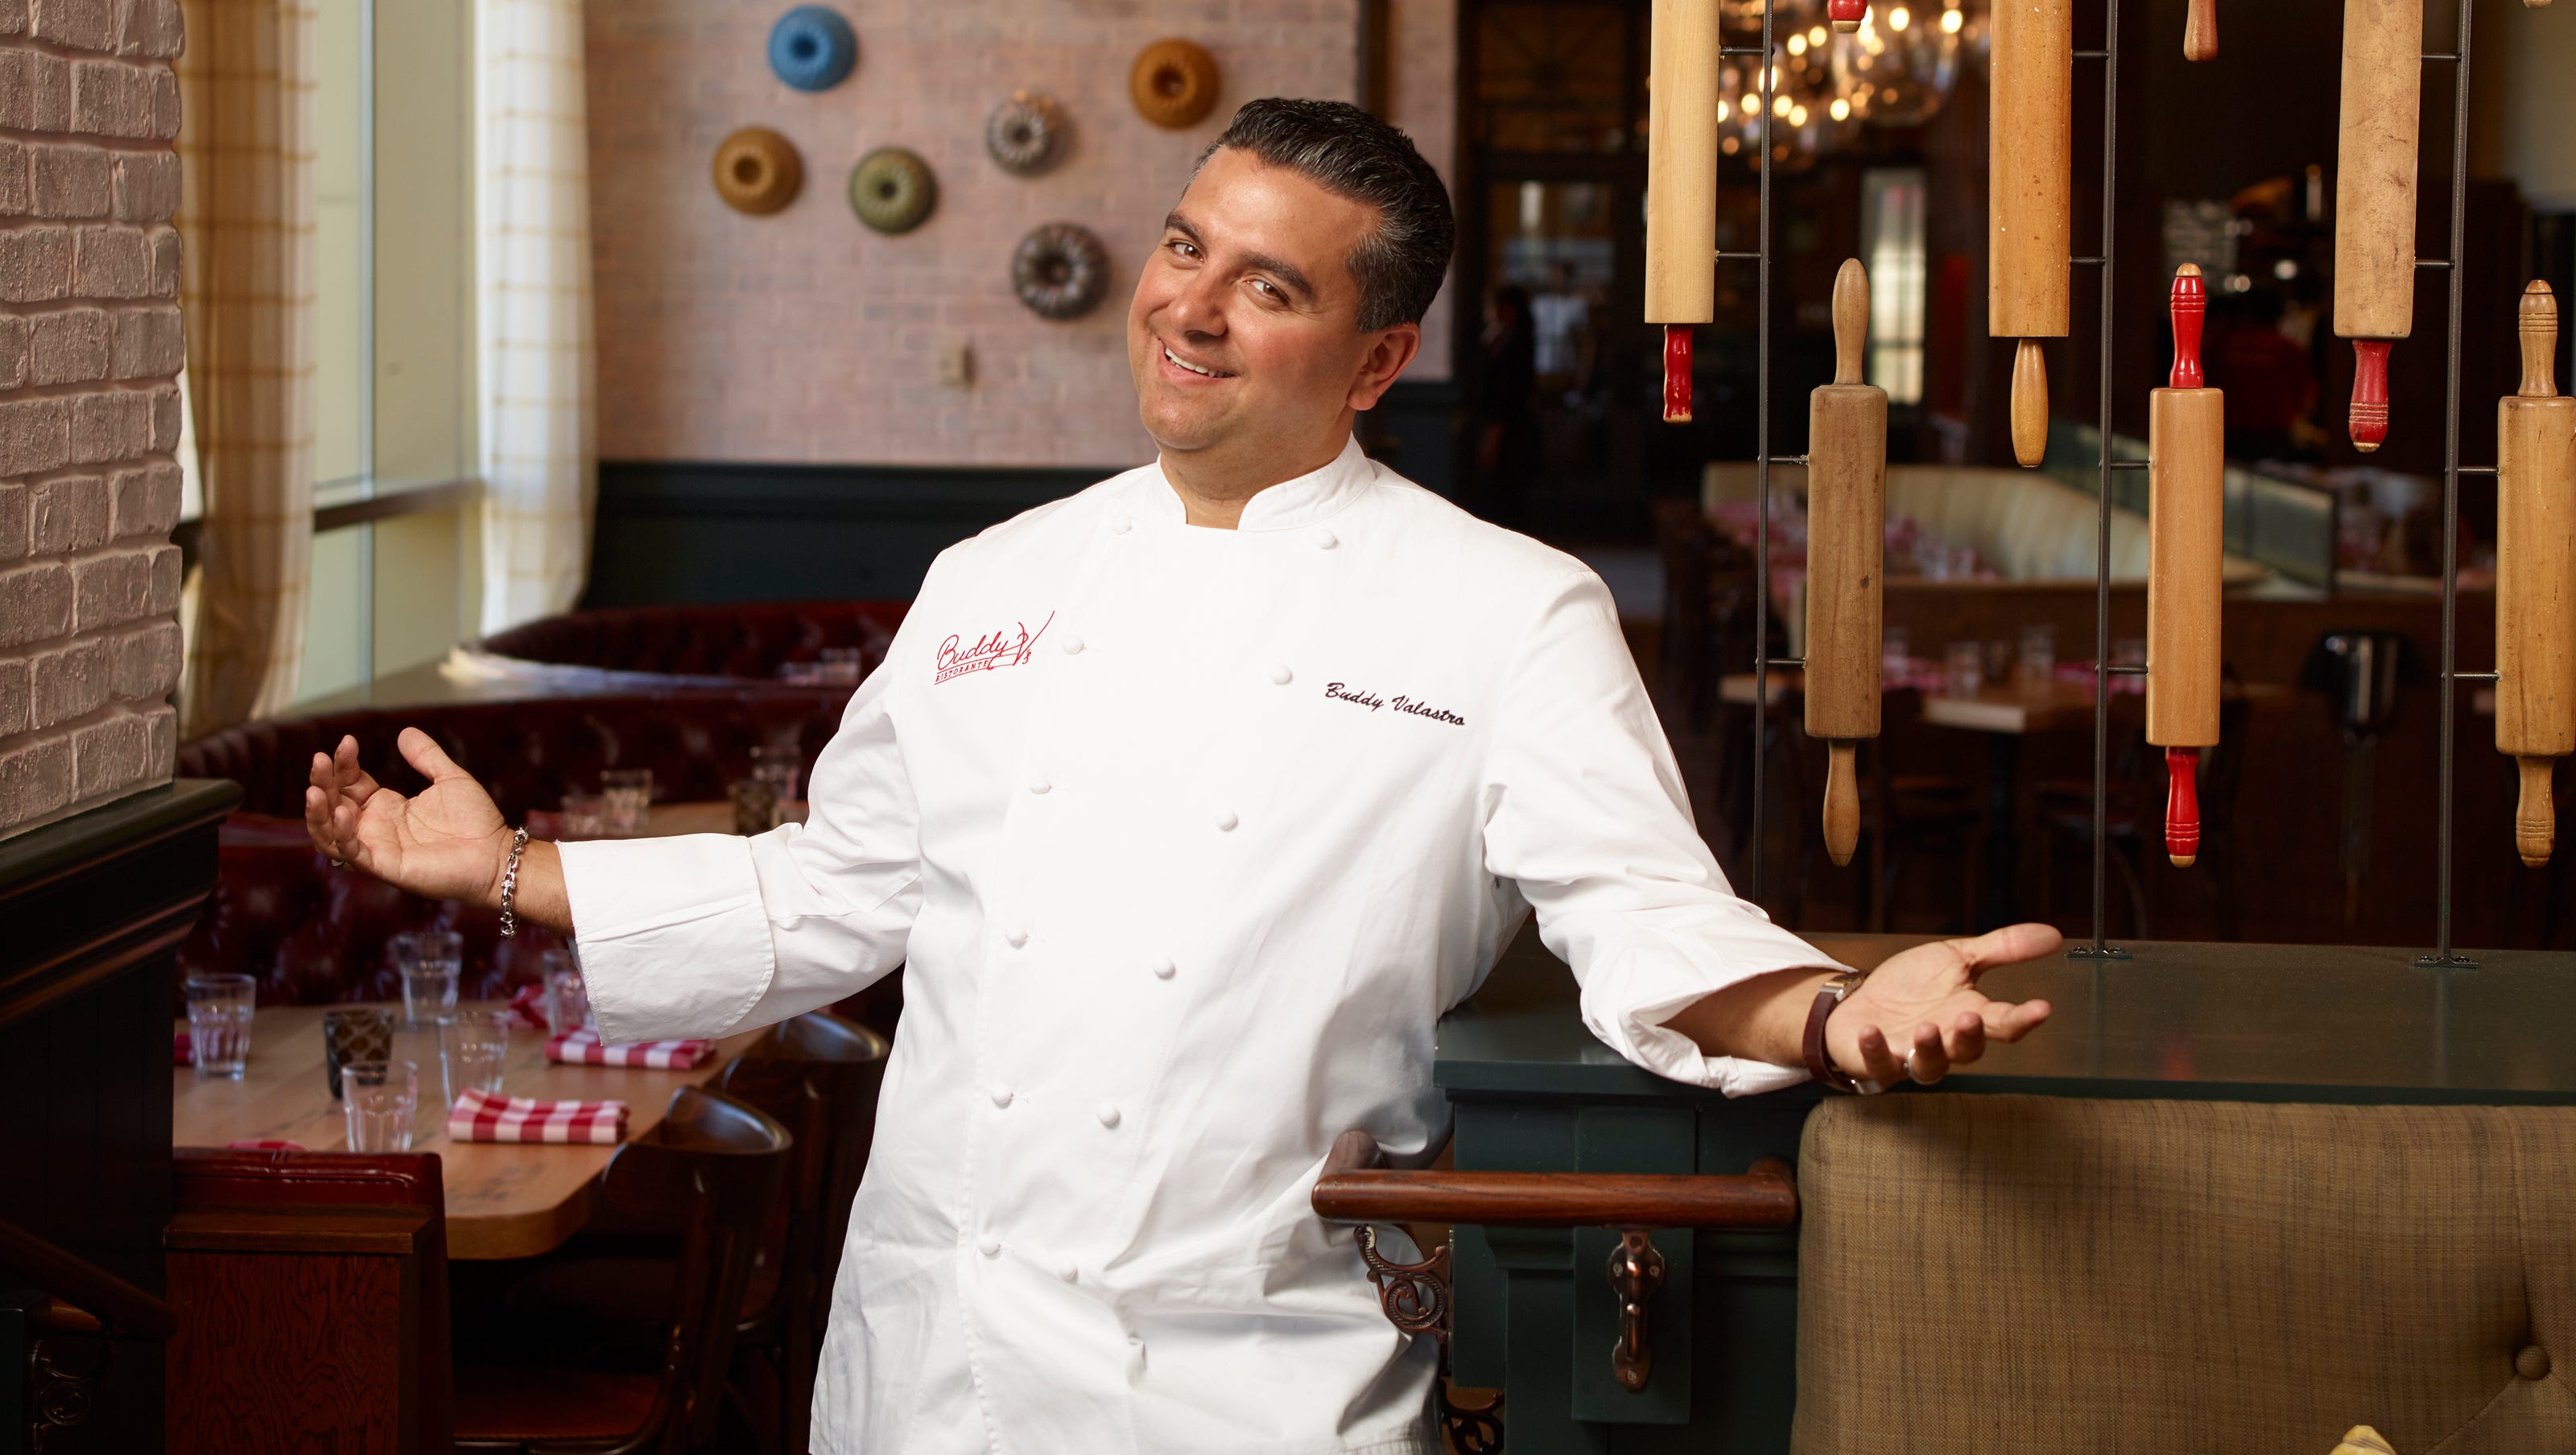 Cake Boss Buddy Valastro Describes Impaled Hand Terrible Accident